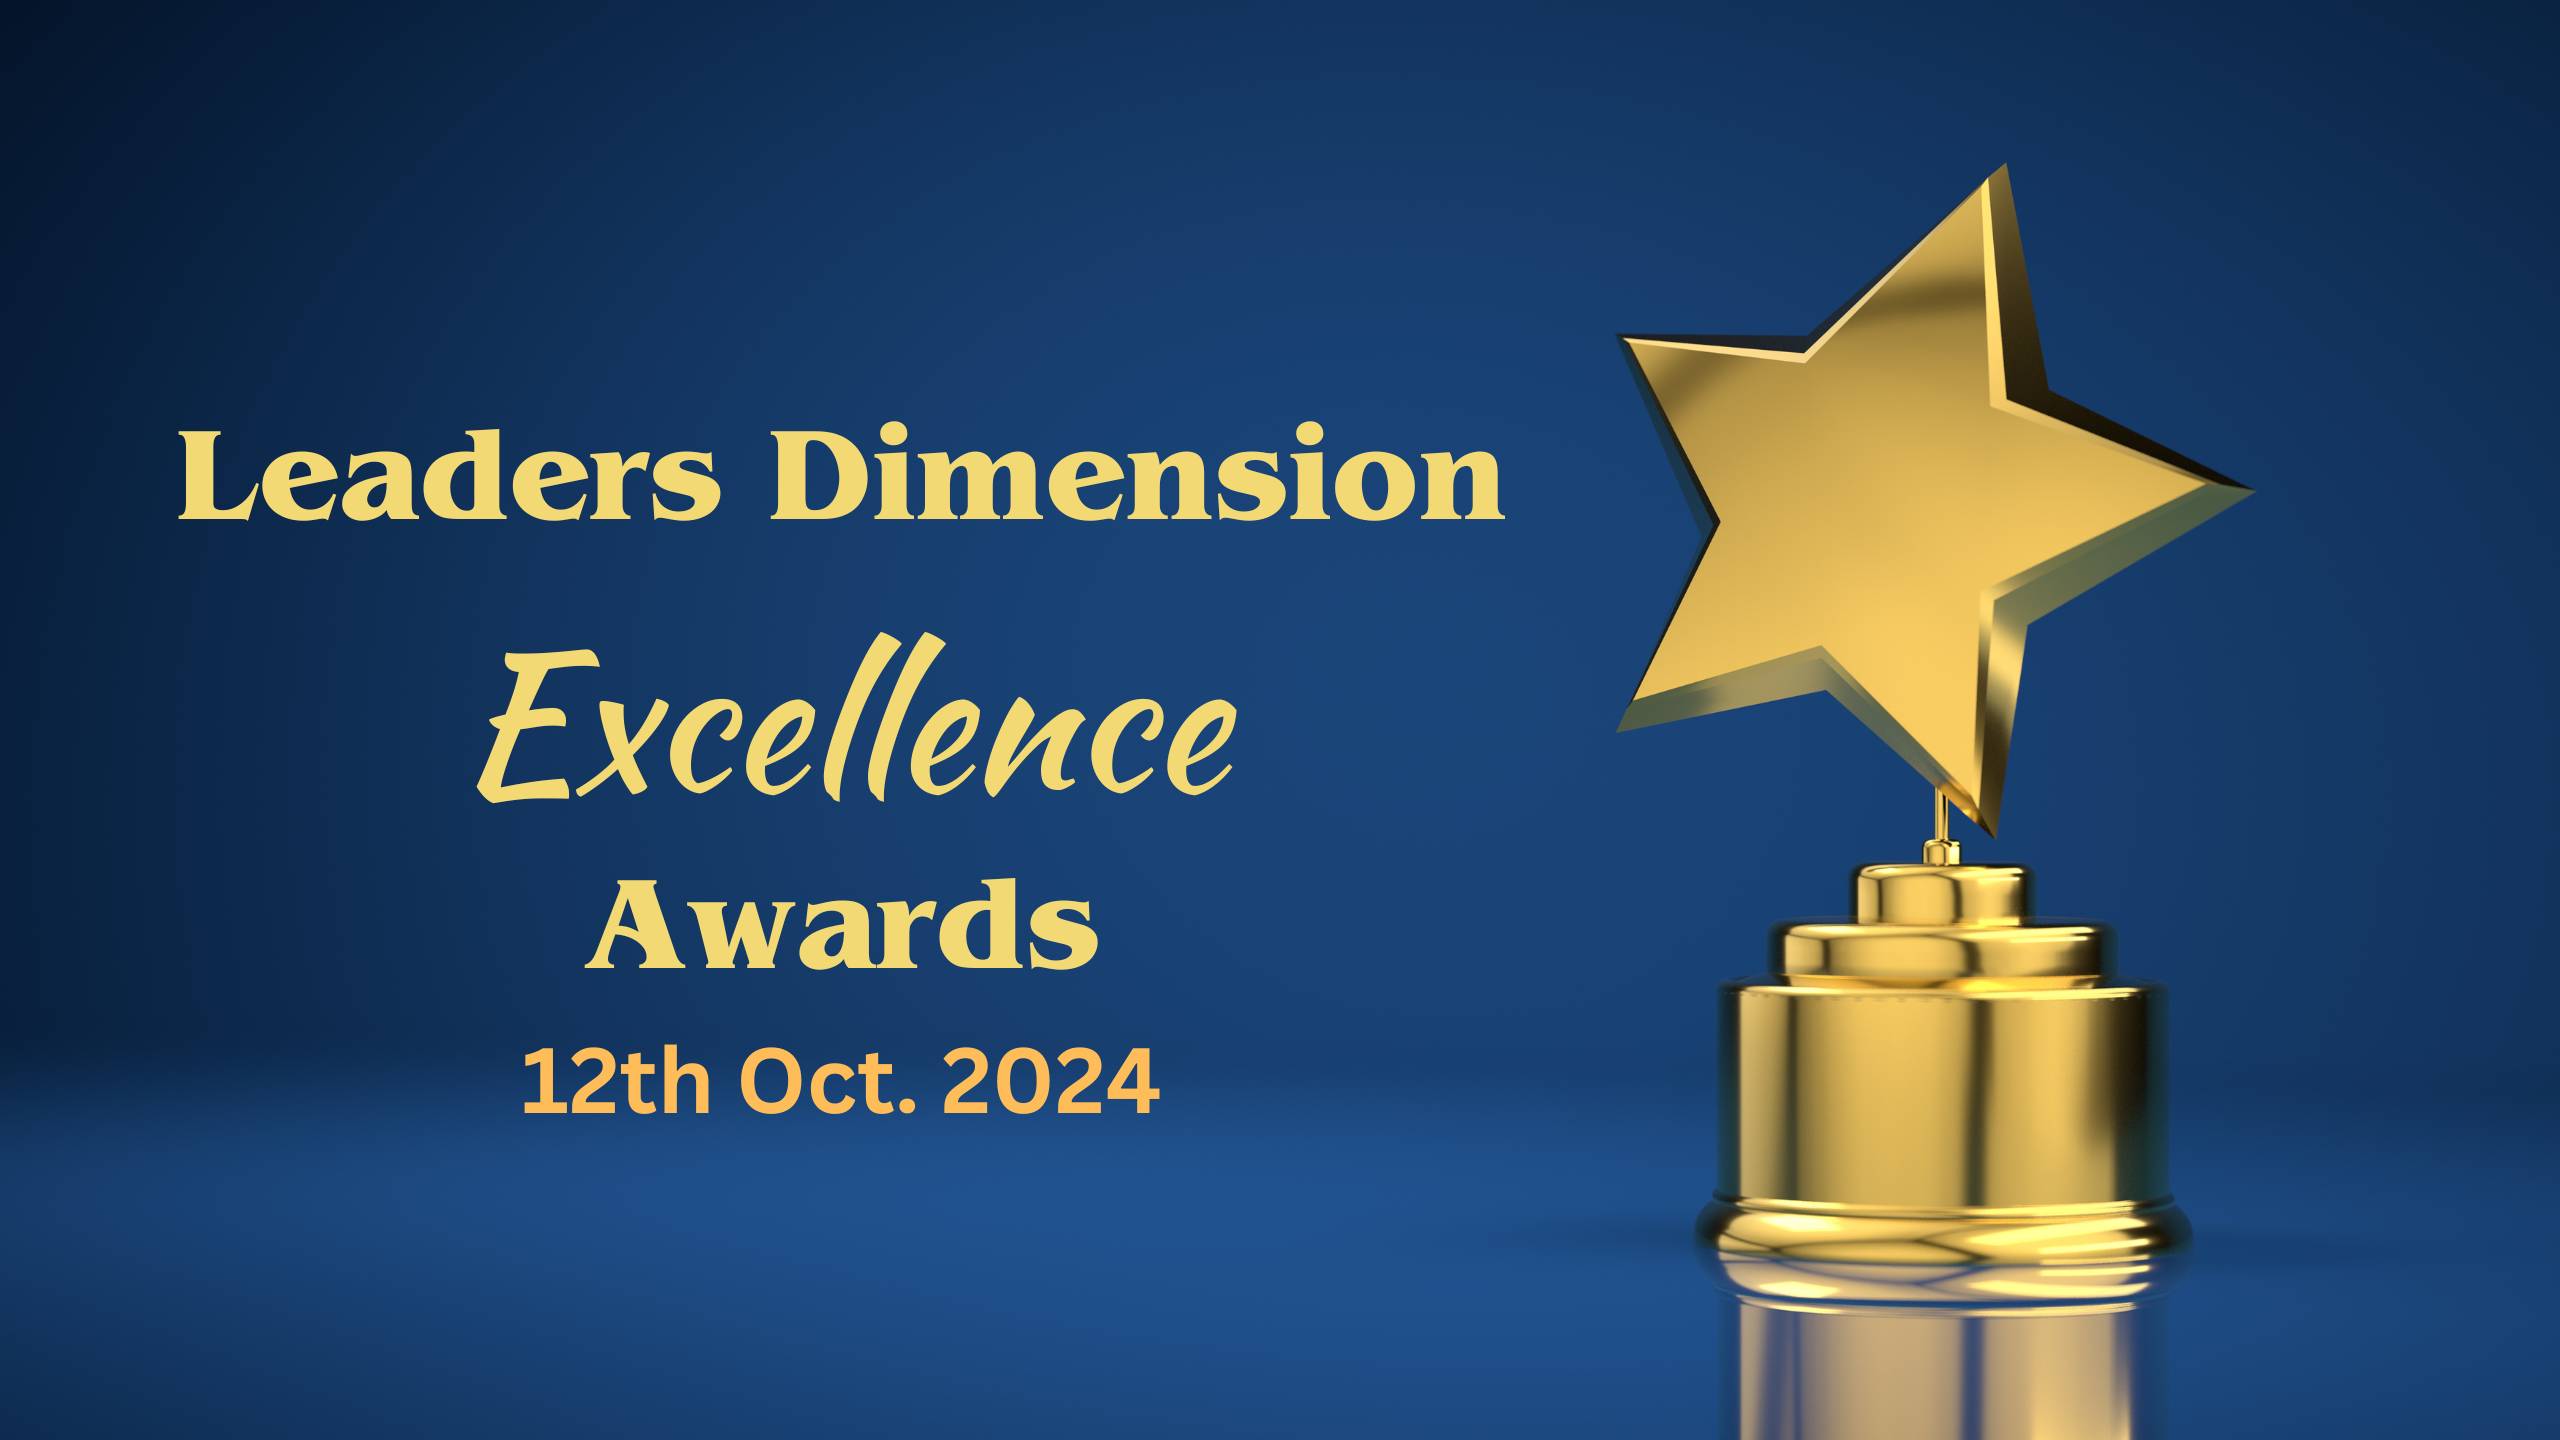 Leaders Dimension Excellence Awards